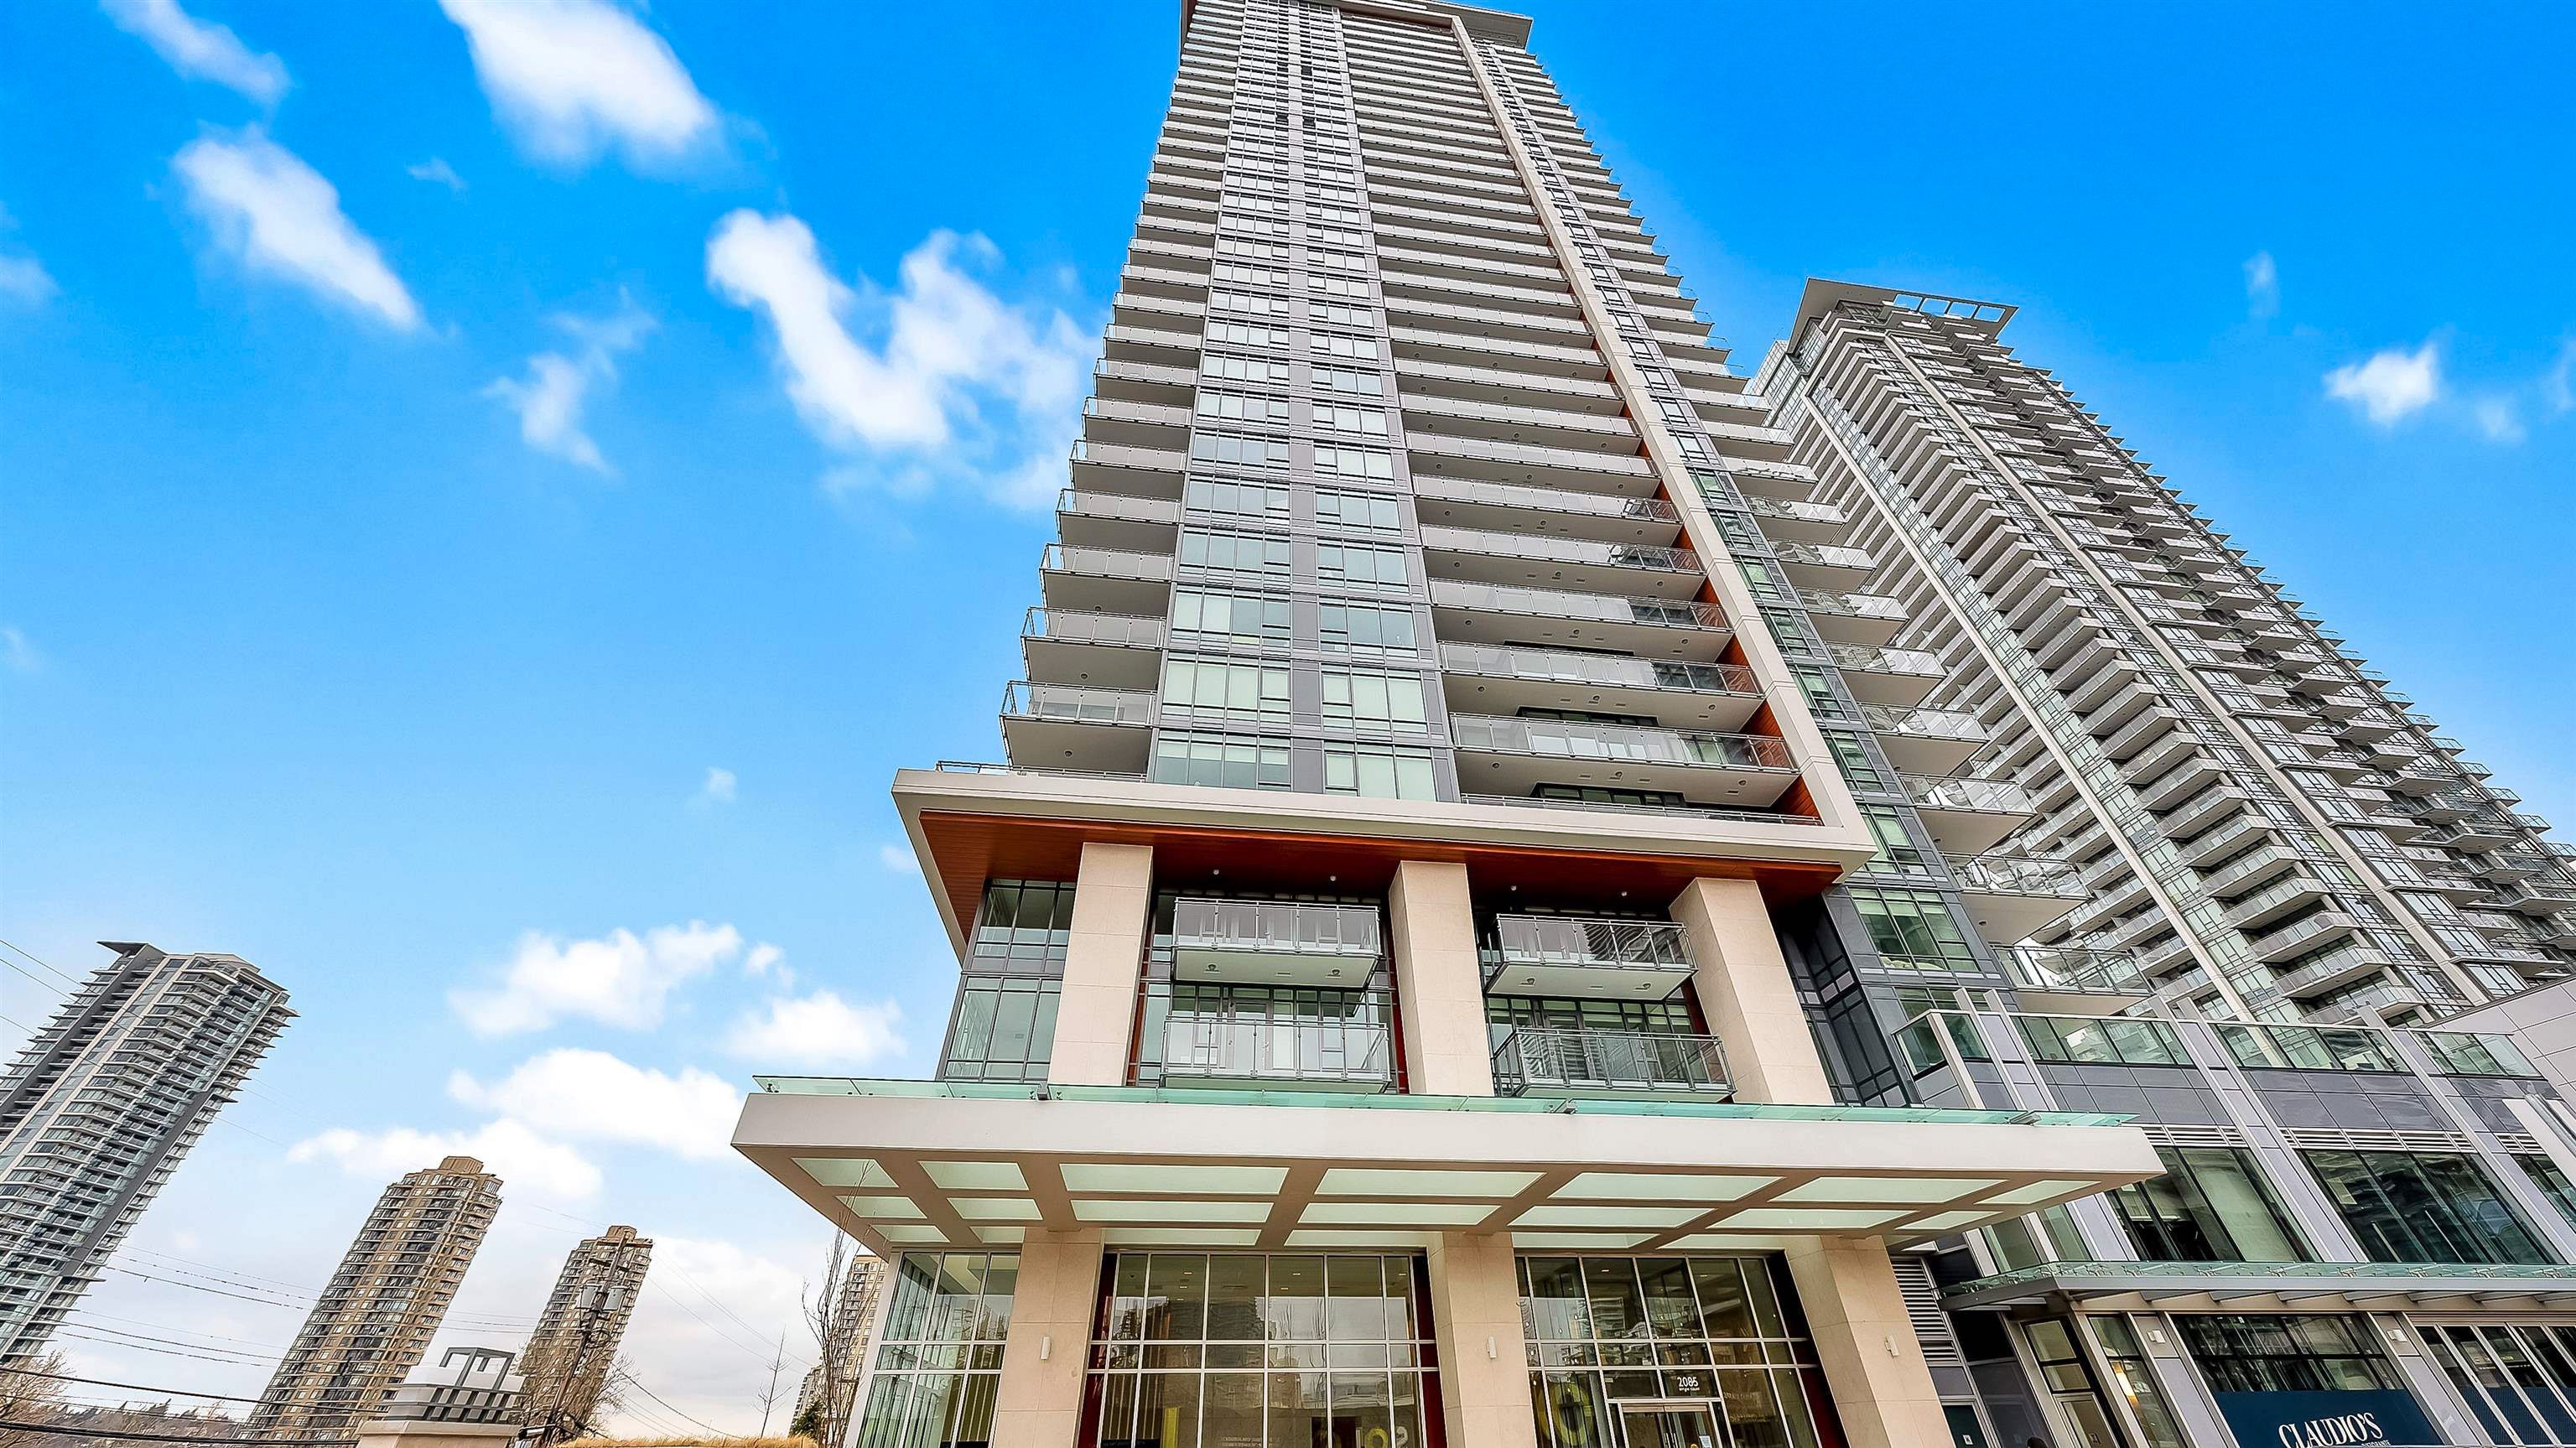 Main Photo: 1502 2085 SKYLINE Court in Burnaby: Brentwood Park Condo for sale (Burnaby North)  : MLS®# R2650520